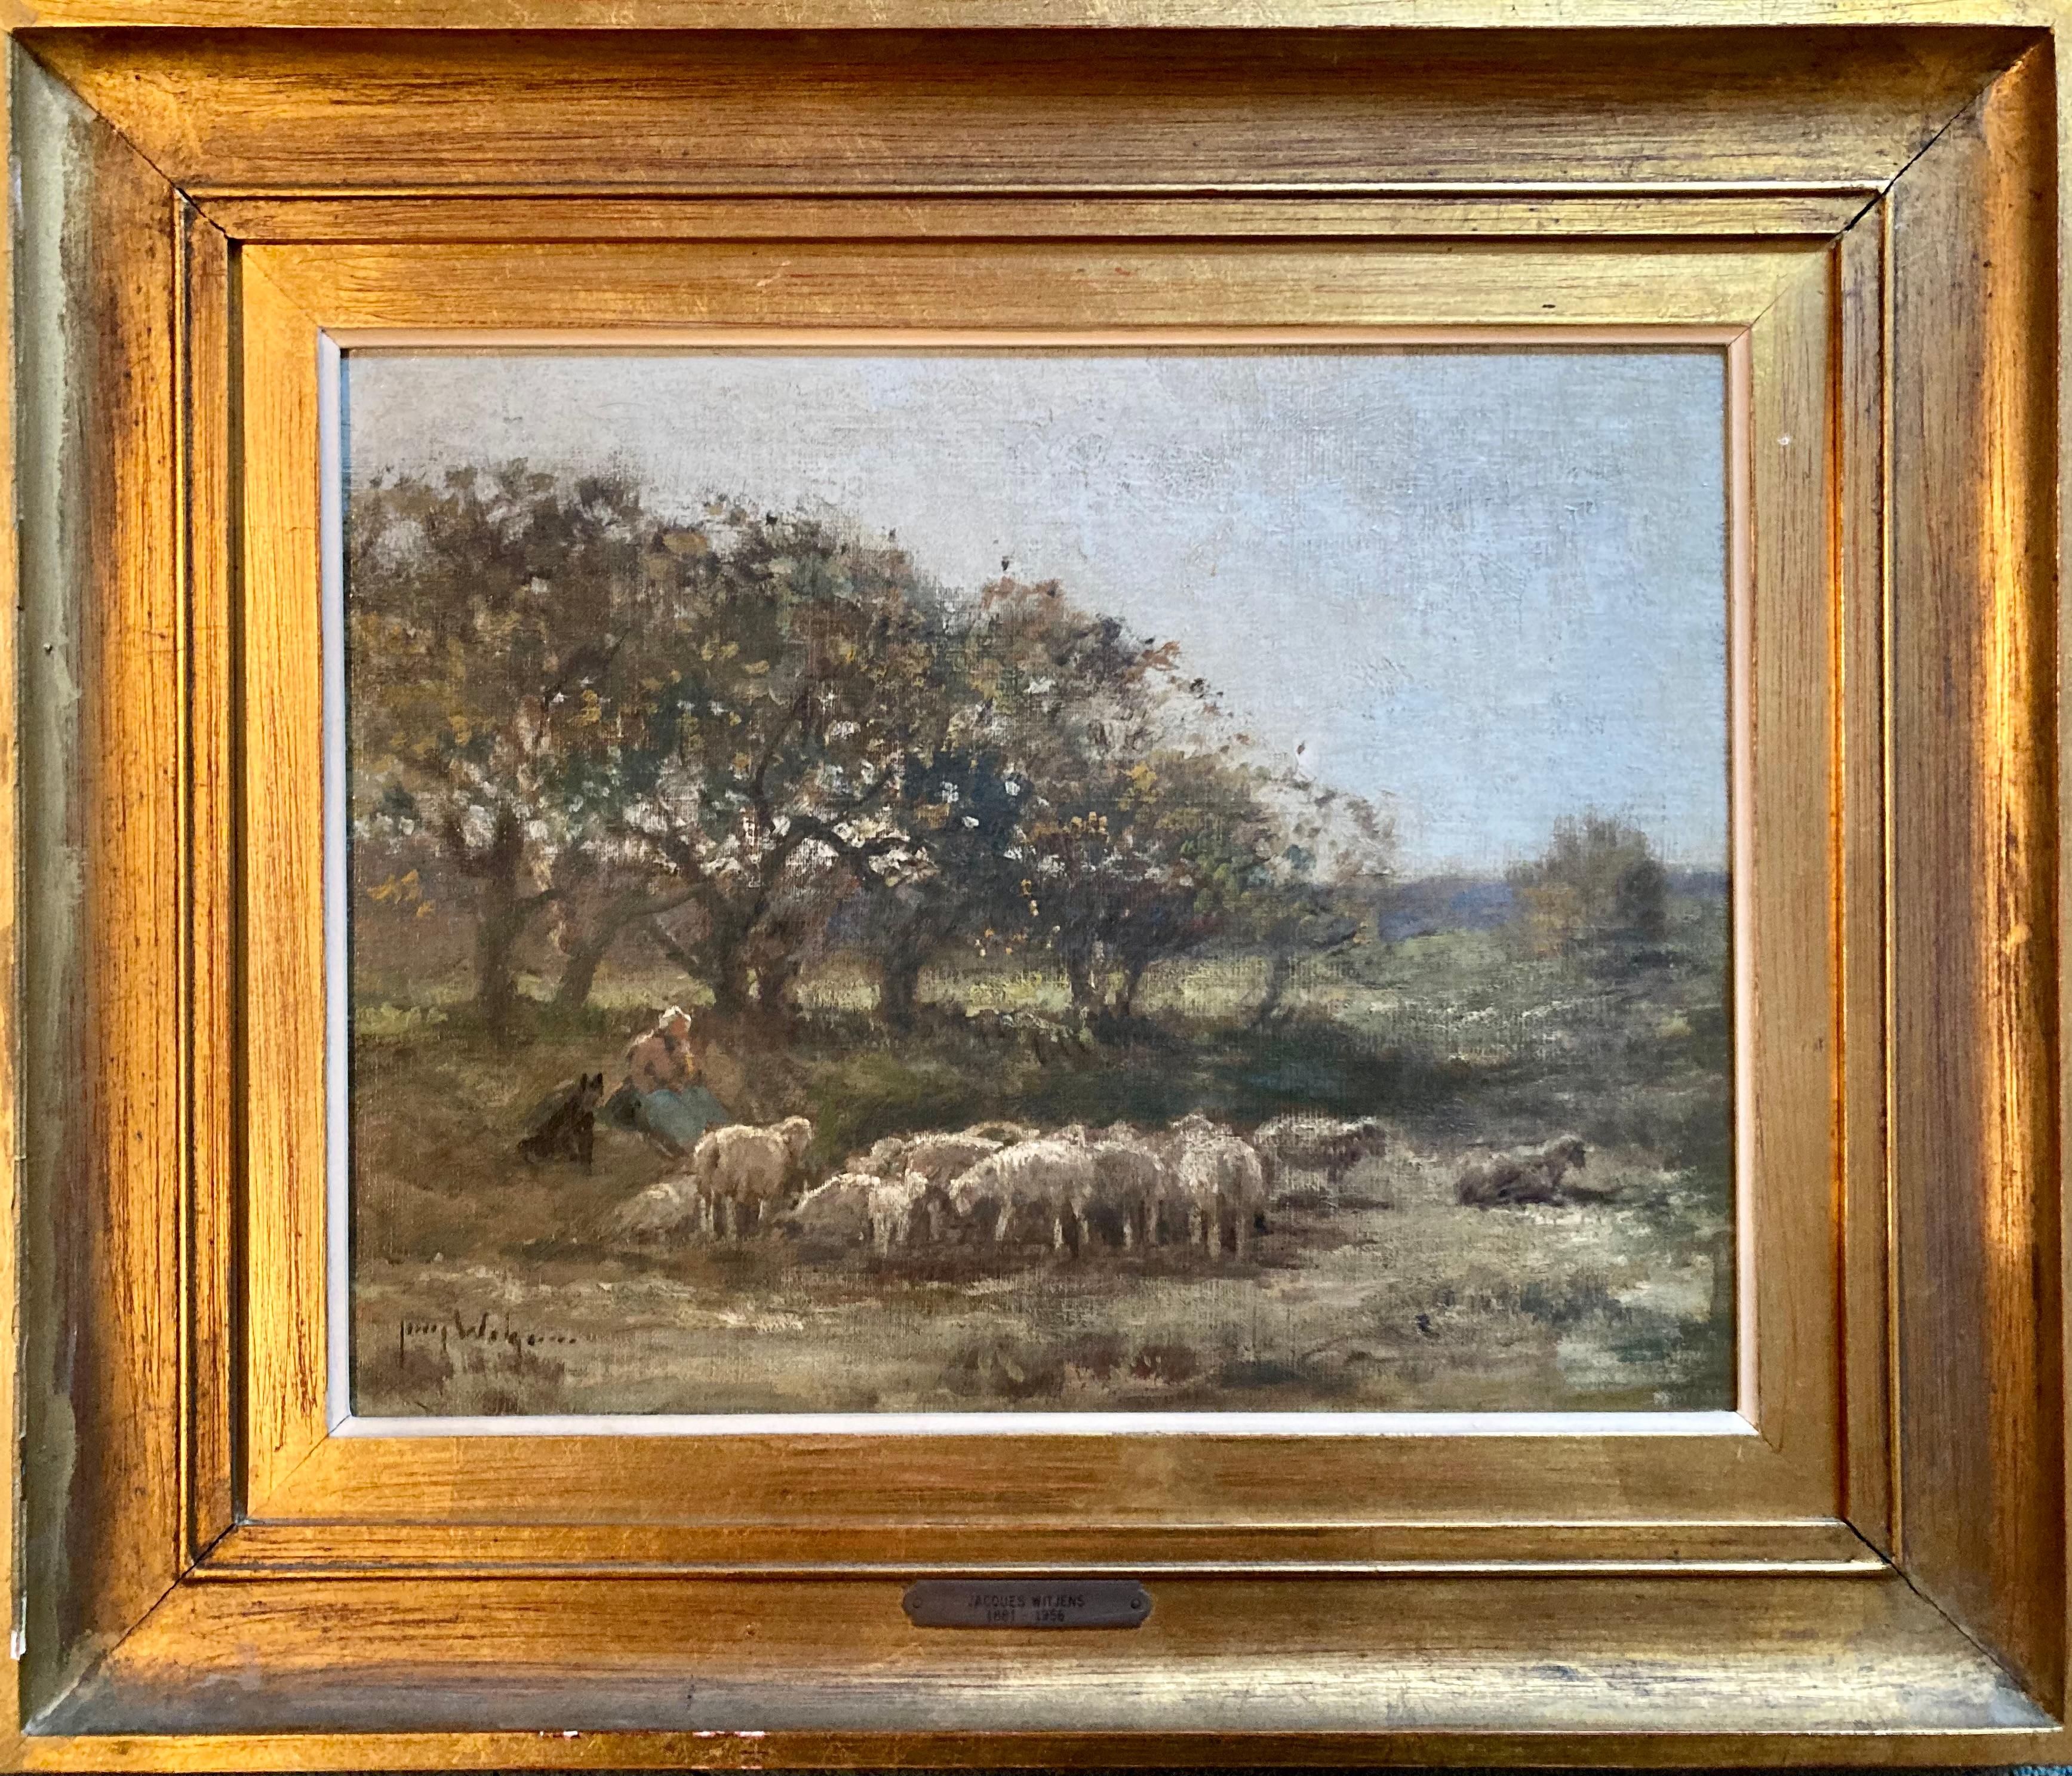 "Sheeps in Field" - Painting by Jacque Witjens